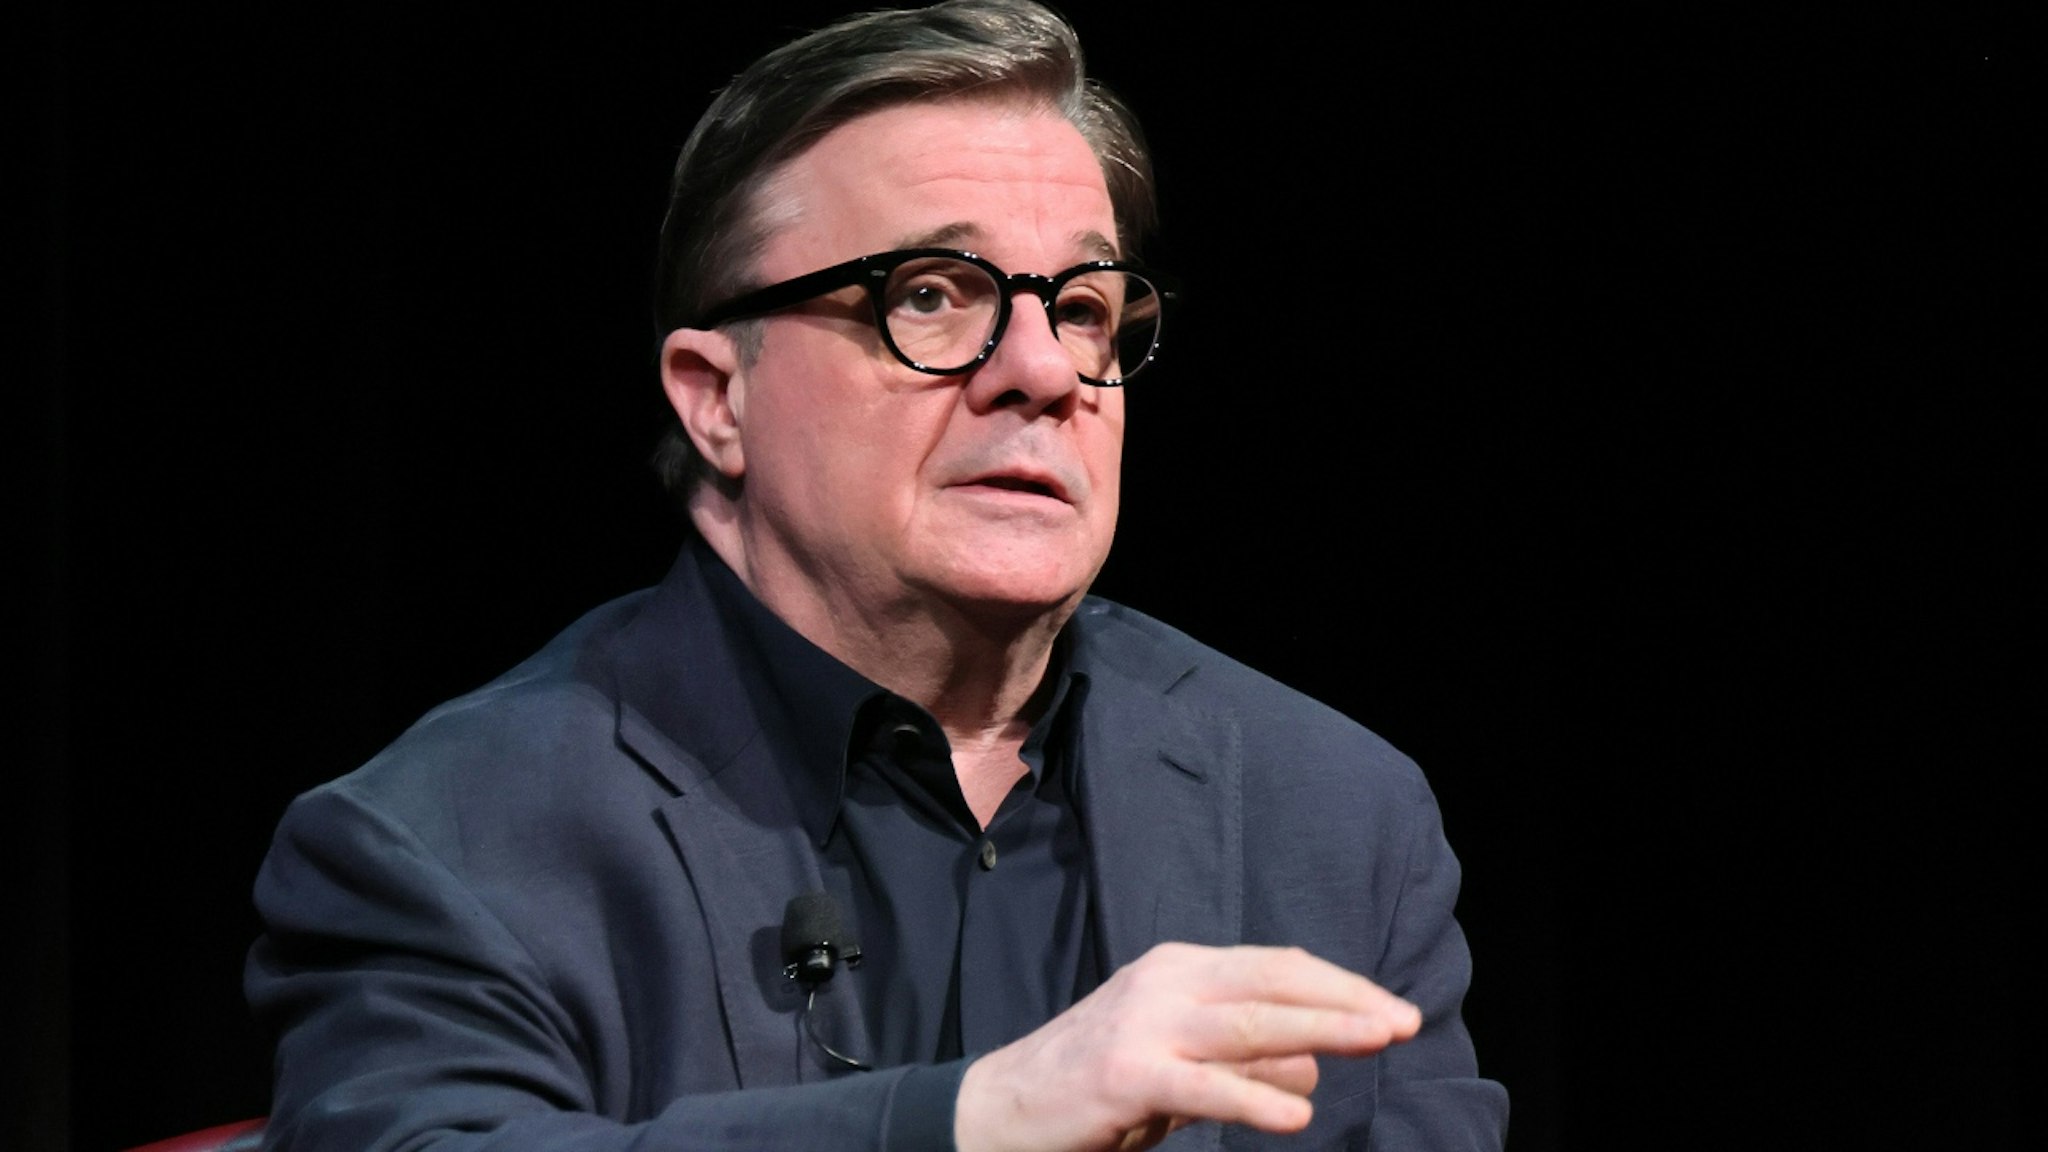 Nathan Lane speaks onstage during SAG-AFTRA Foundation Conversations On Broadway with Nathan Lane, Danny Burstein, and Zoë Wanamaker at SAG-AFTRA Foundation Robin Williams Center on March 10, 2023 in New York City.